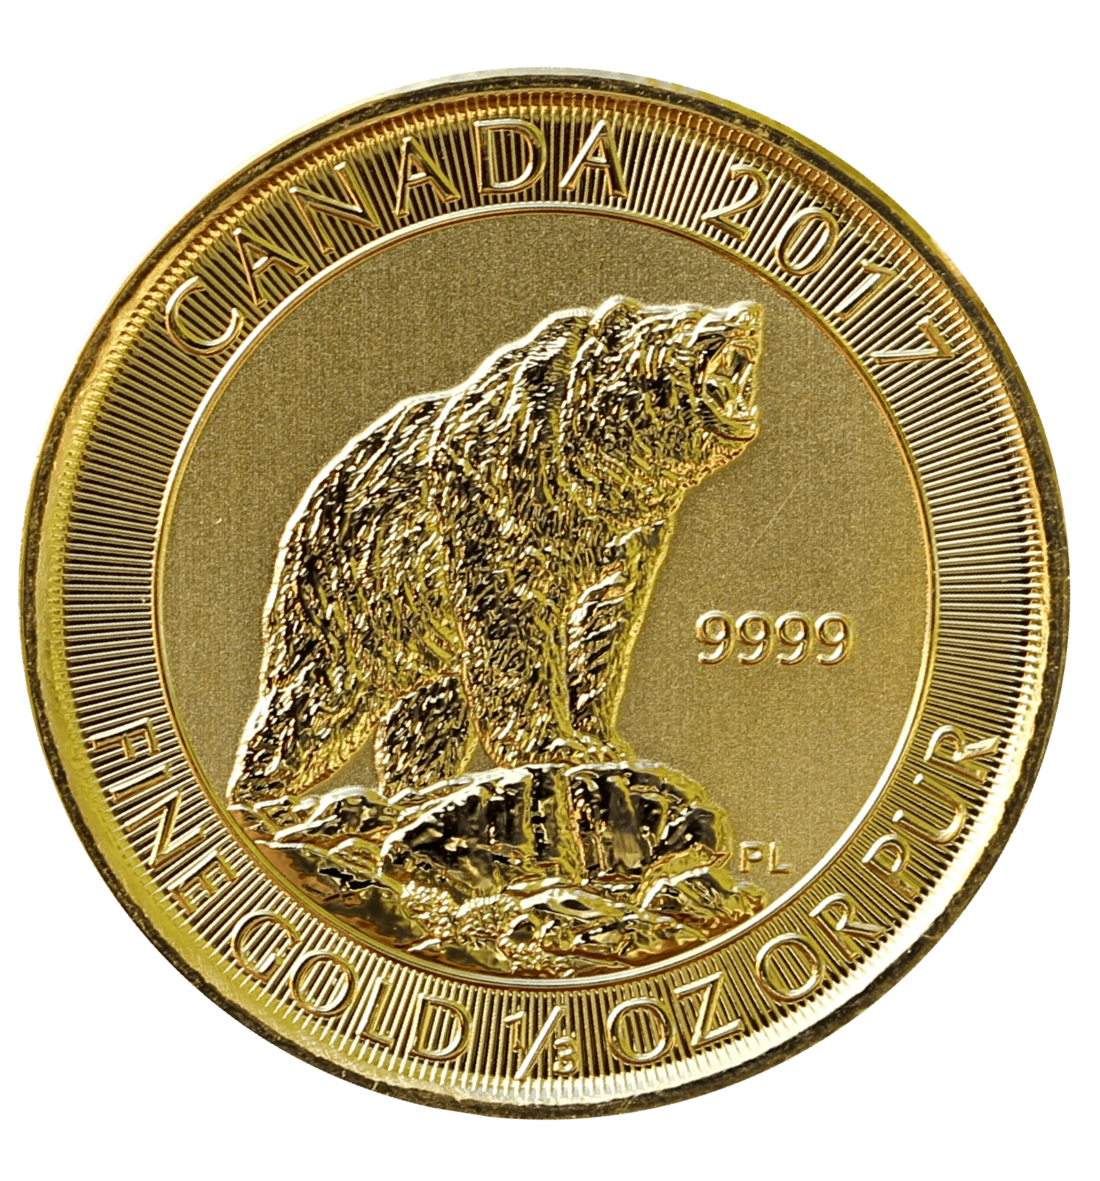 Gold Canadian Grizzly Bear Coin - 1/3 Ounce